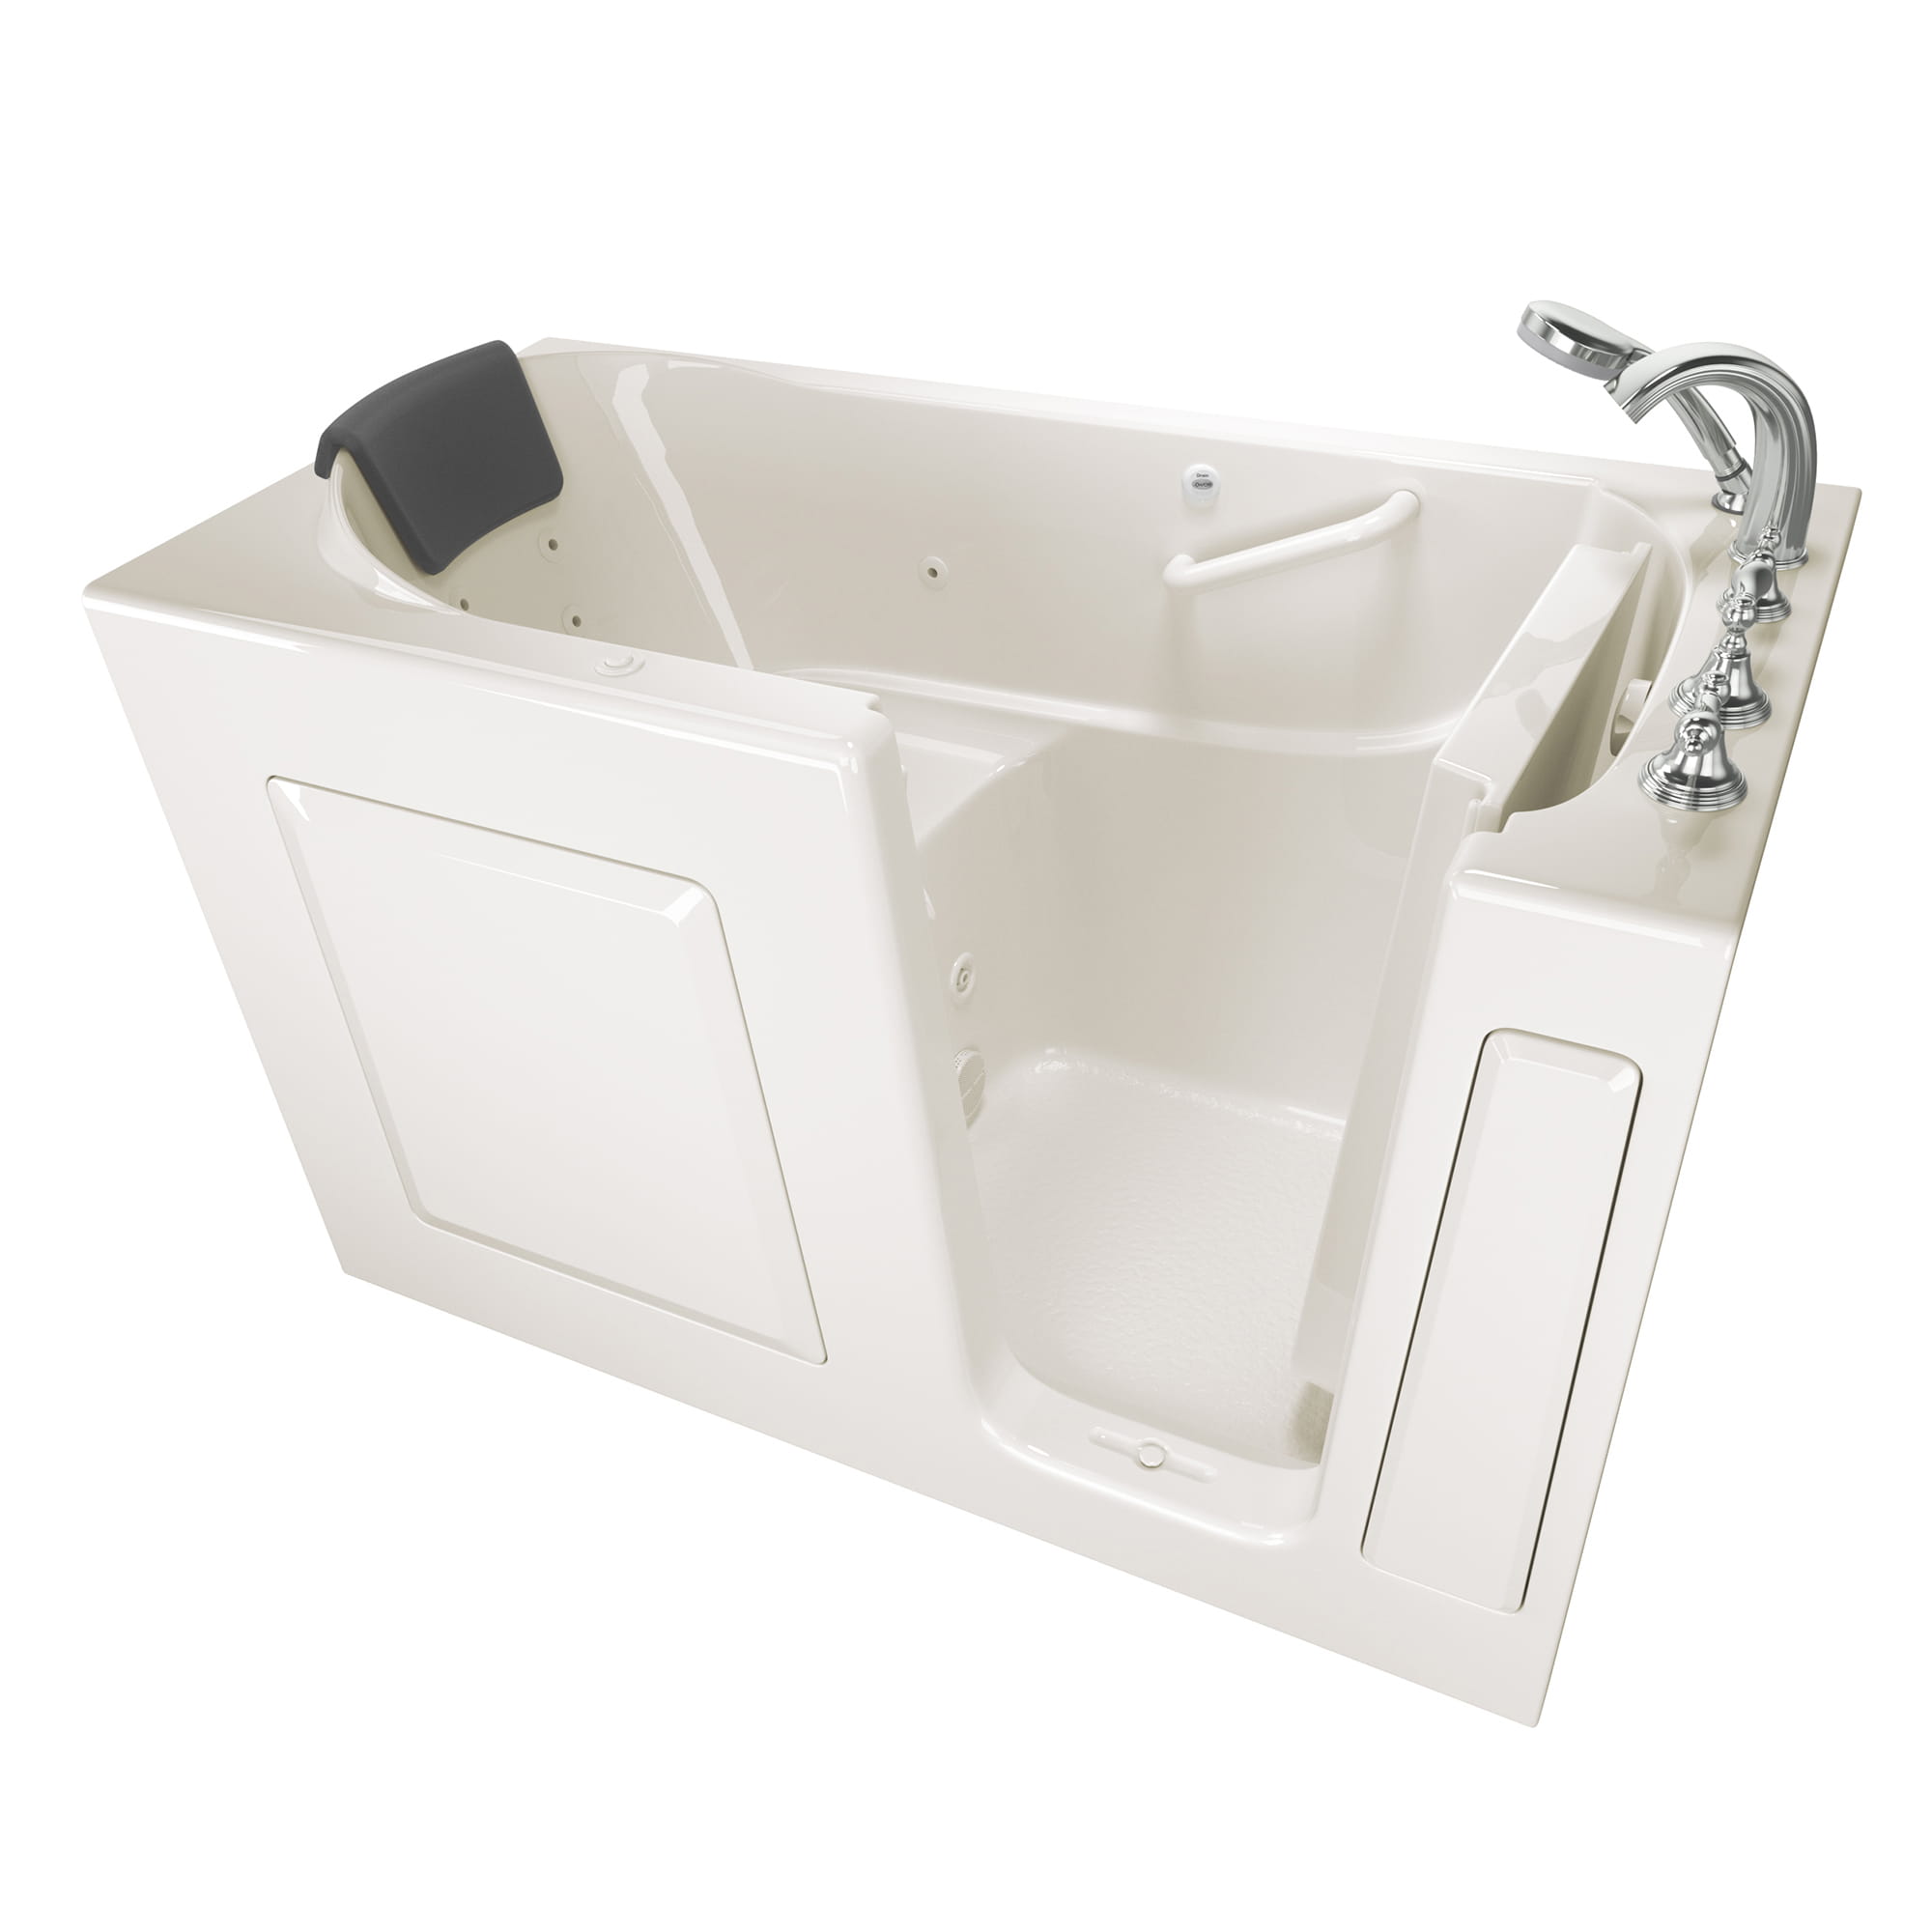 Gelcoat Premium Series 30 x 60 -Inch Walk-in Tub With Whirlpool System - Right-Hand Drain With Faucet